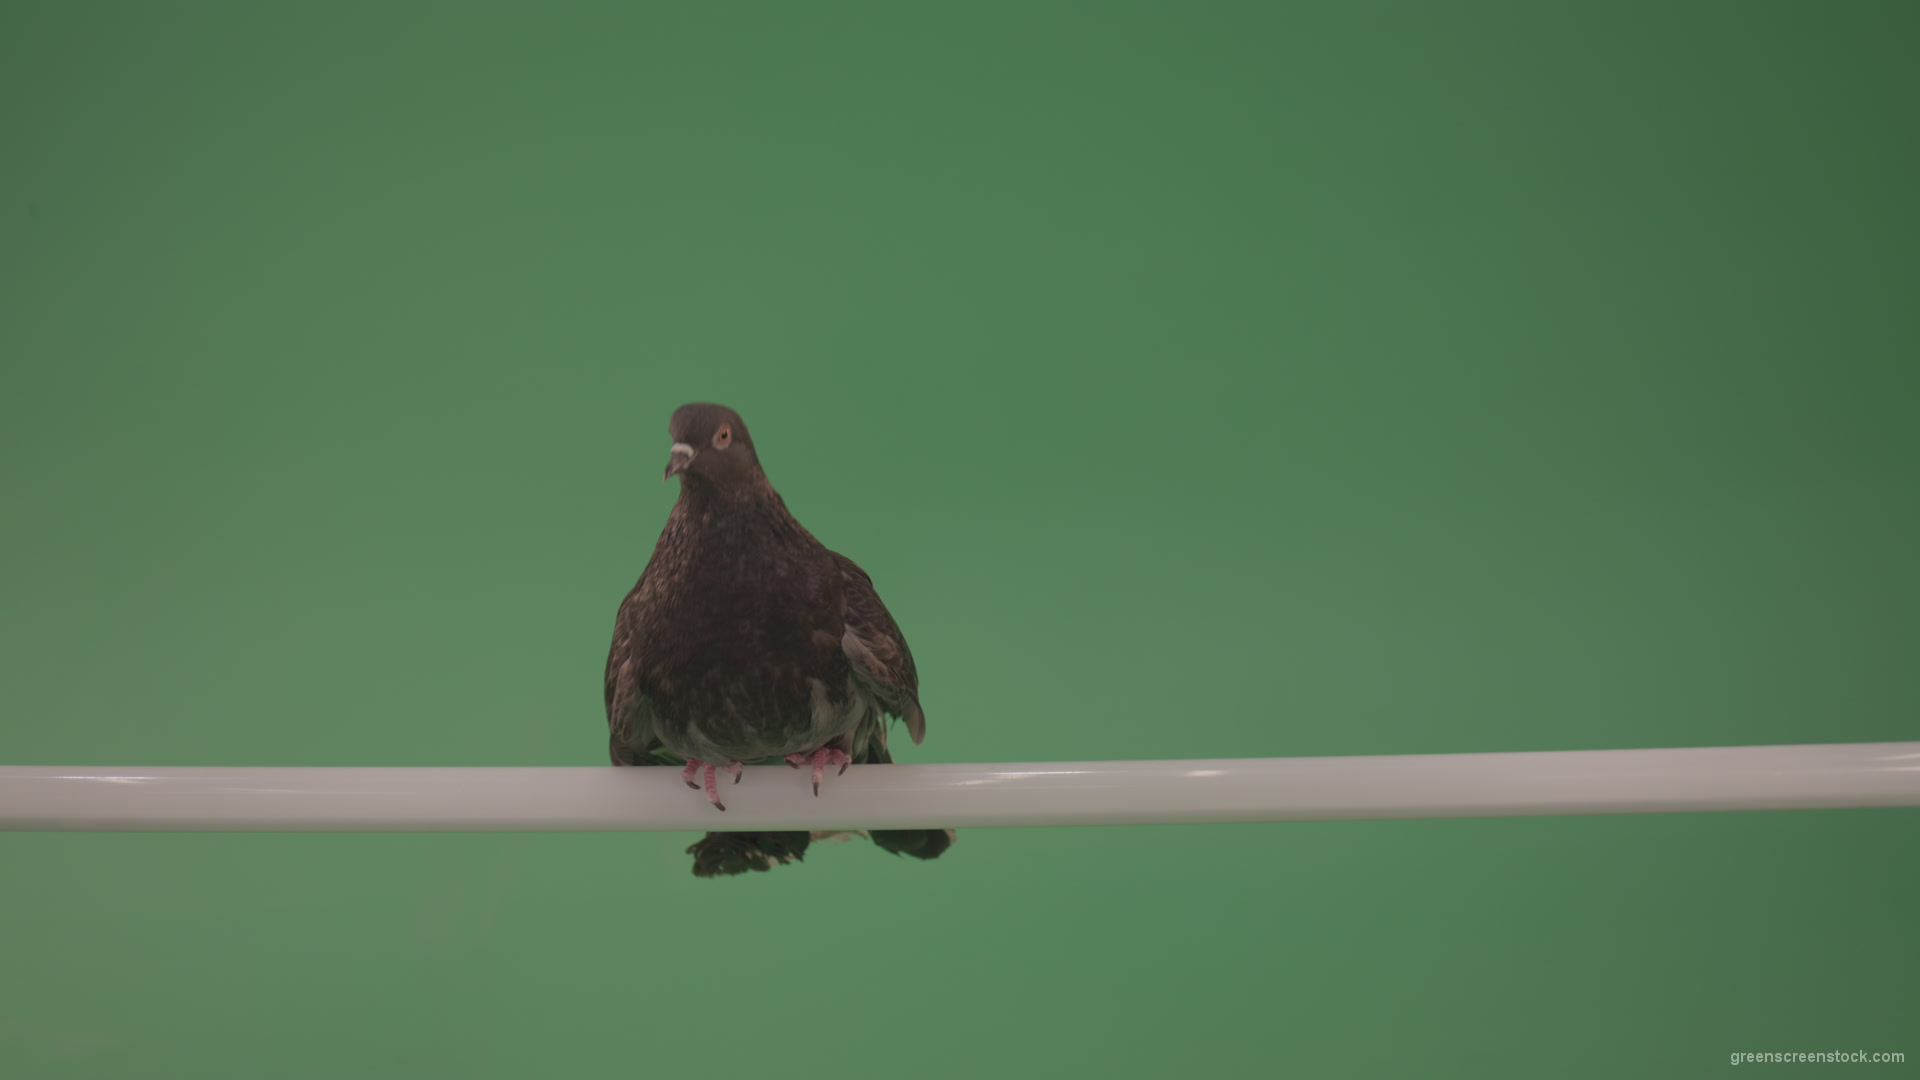 Dove-sitting-on-a-branch-in-the-city-isolated-in-green-screen-studio_001 Green Screen Stock